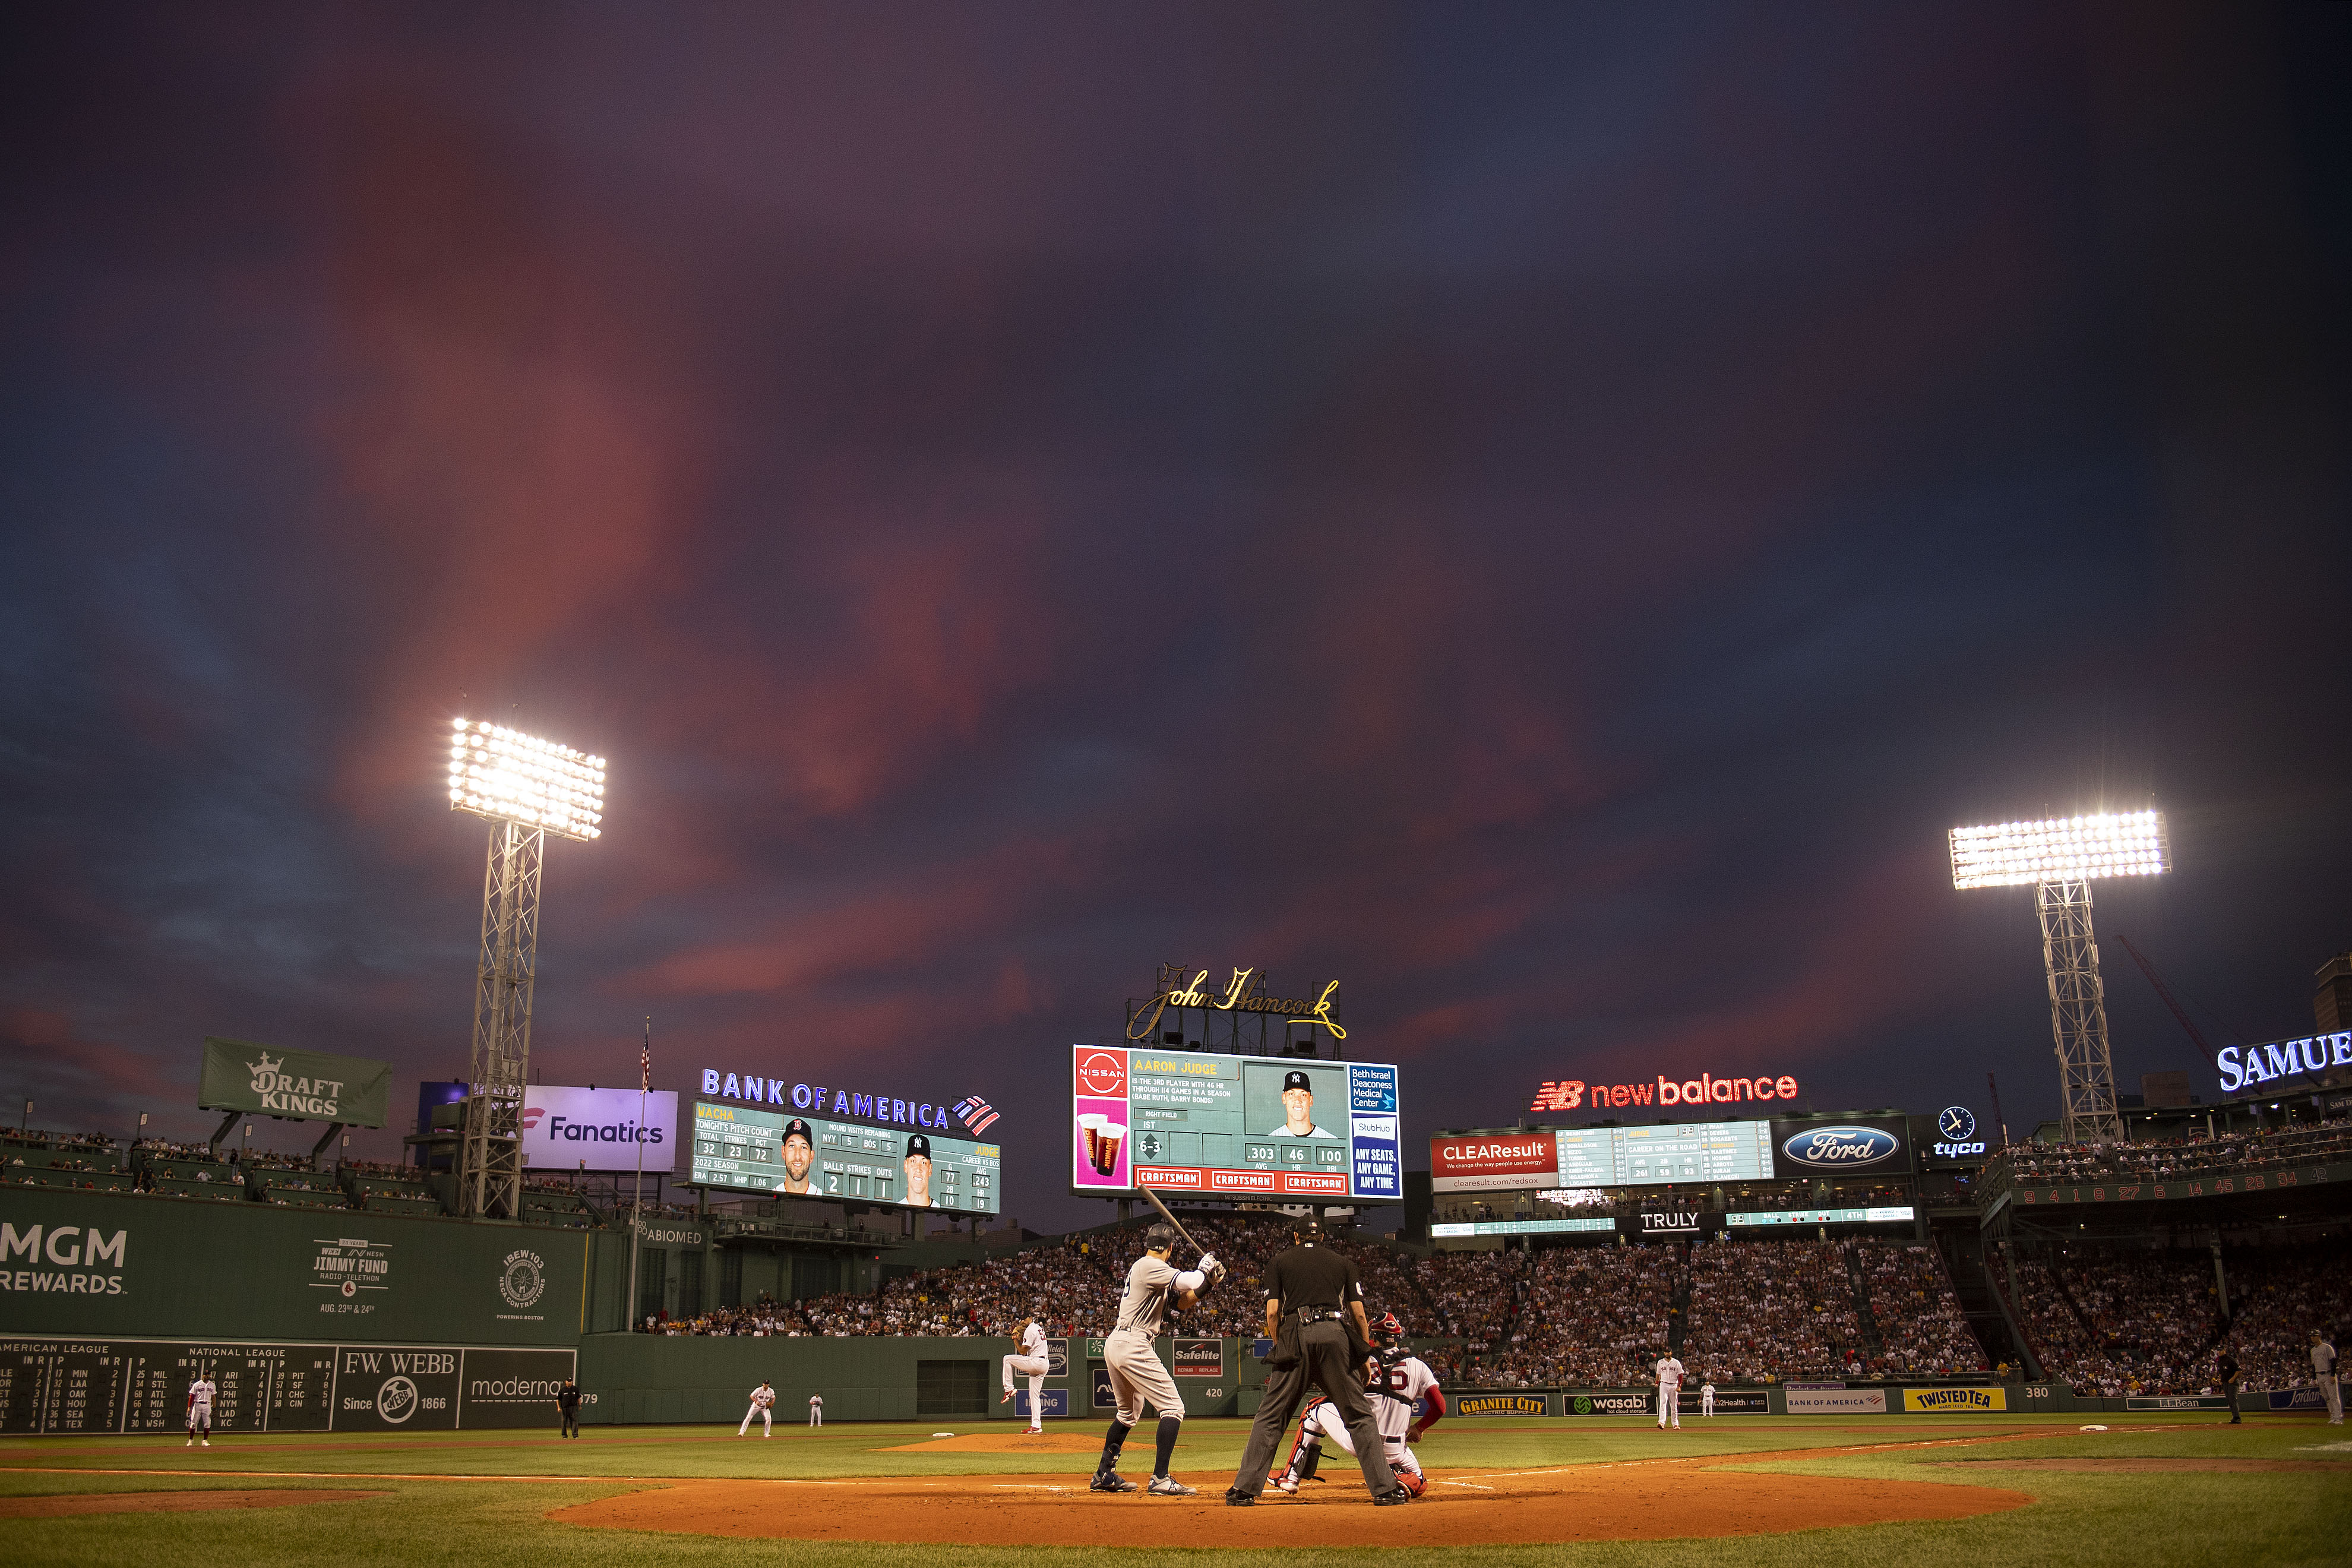 Fenway Park at sunset, Aaron Judge at the plate.